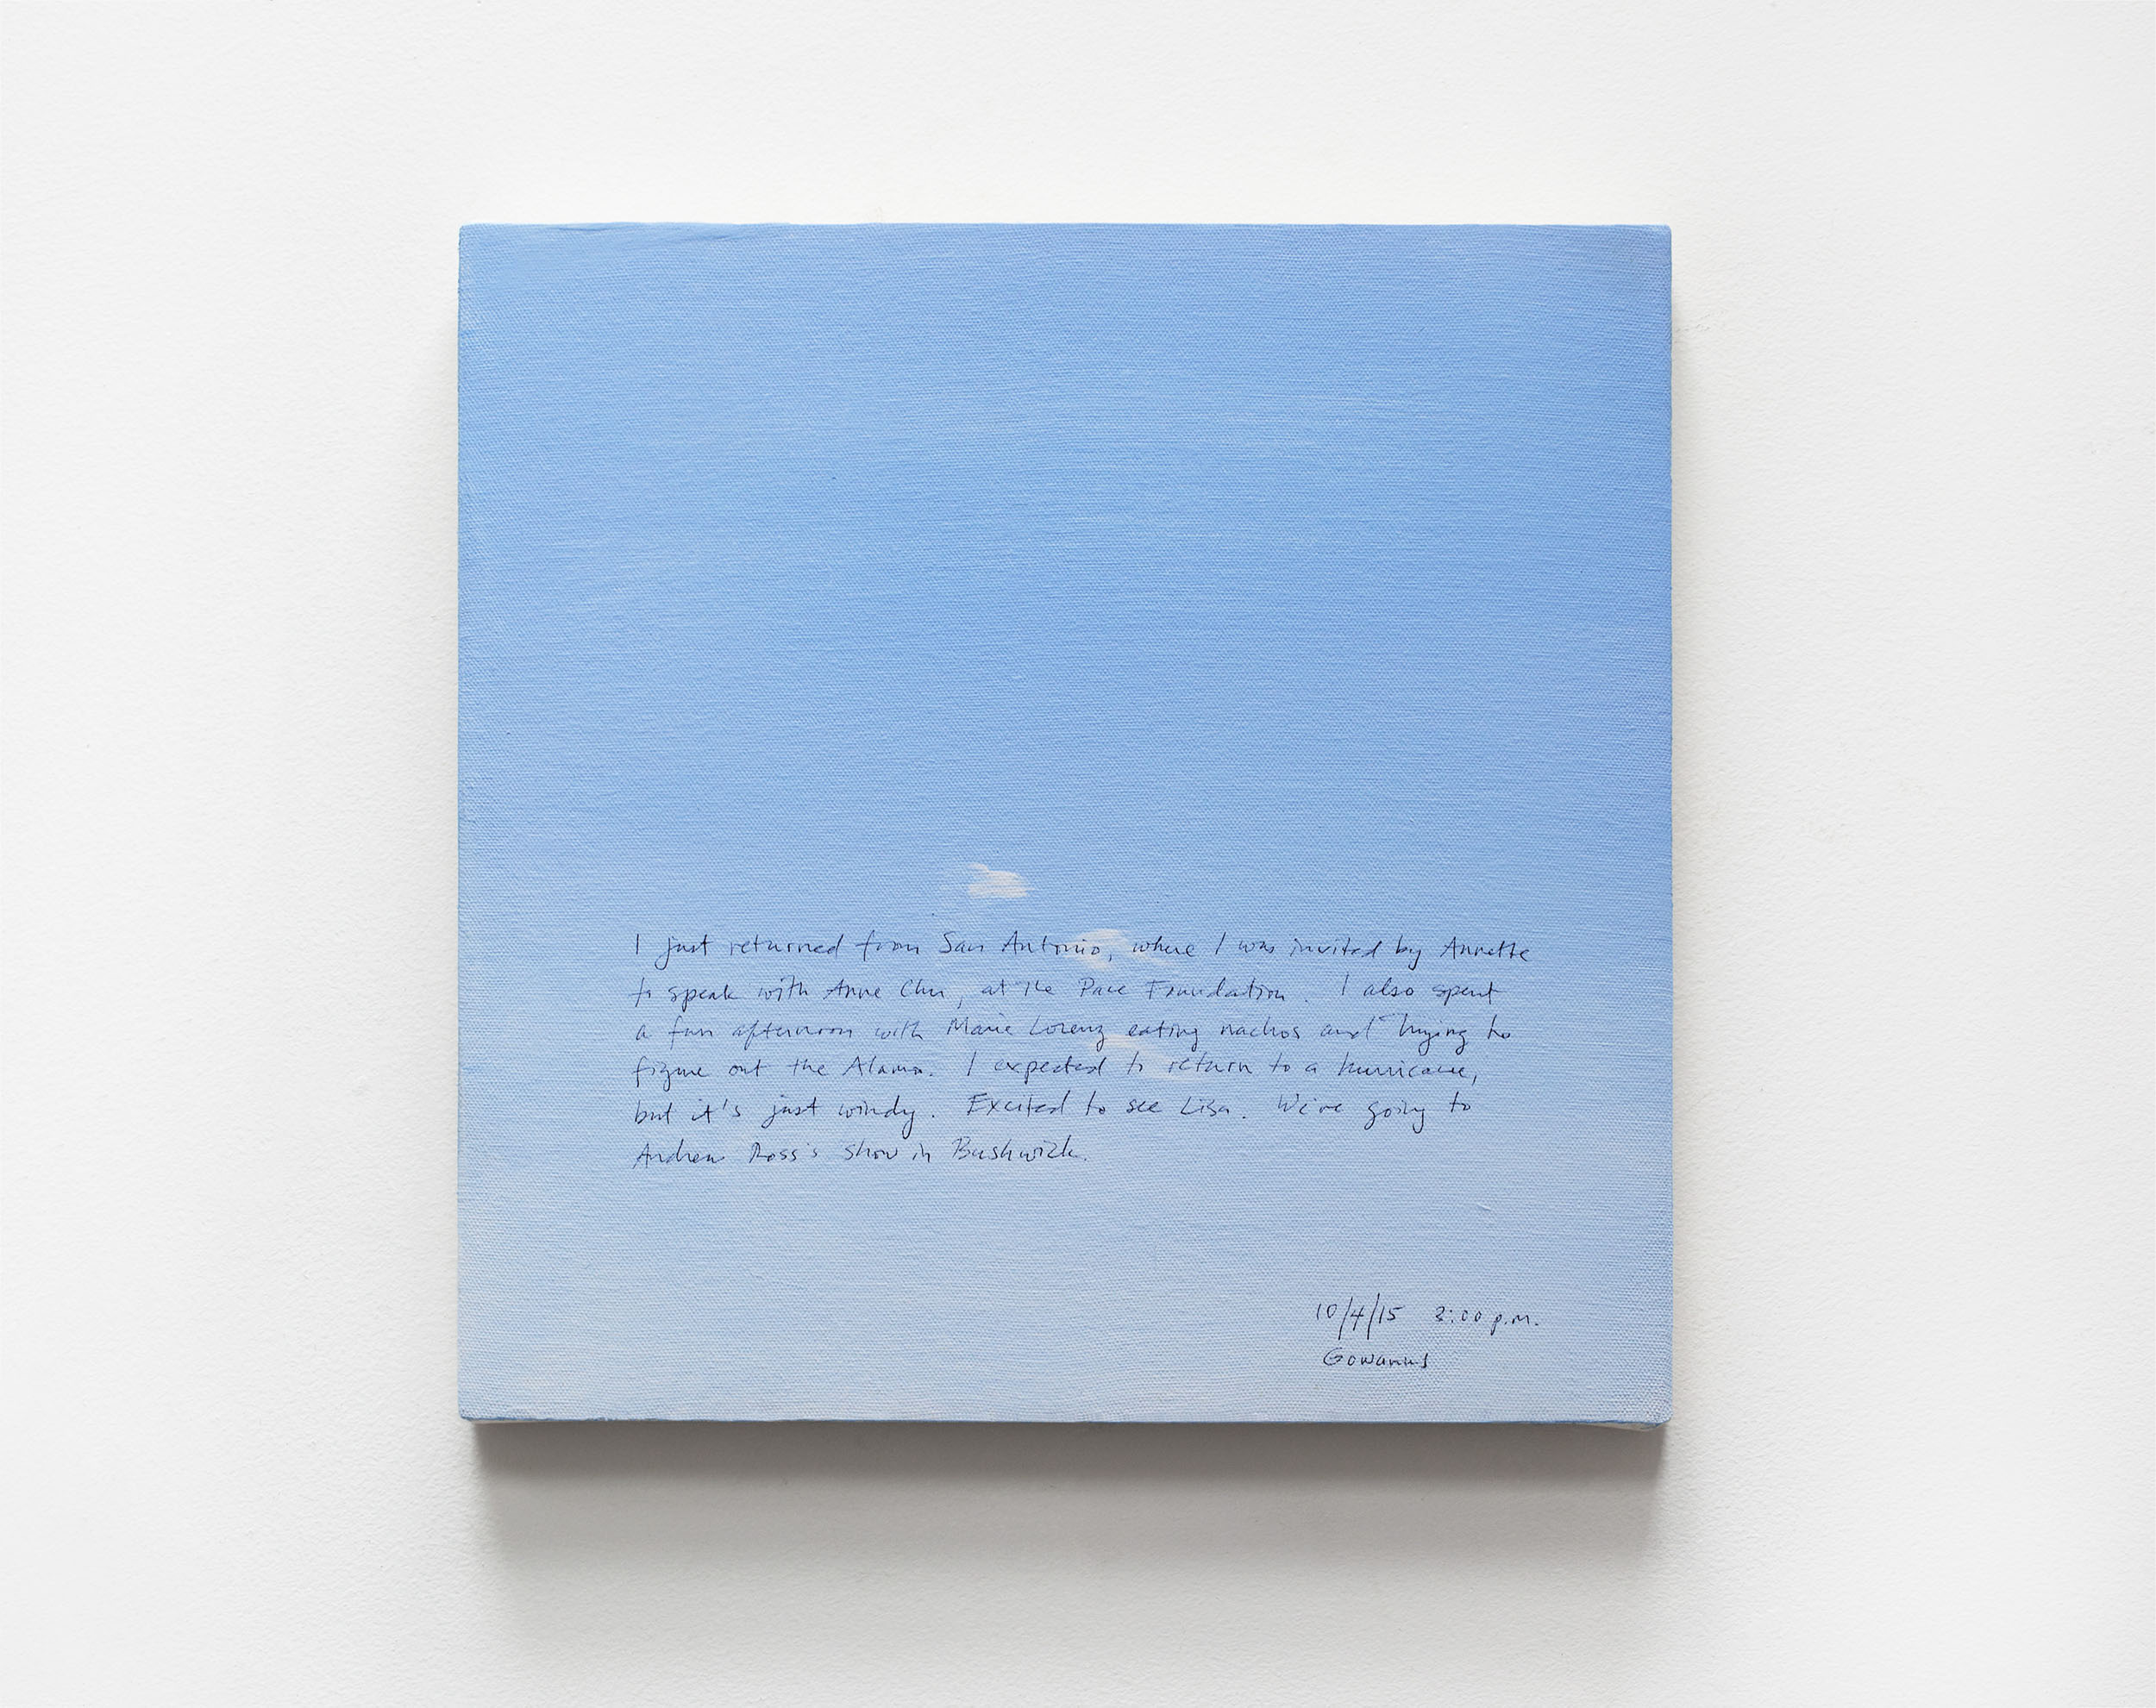 A 14 × 14 inch, acrylic painting of the sky. A journal entry is handwritten on the painting: